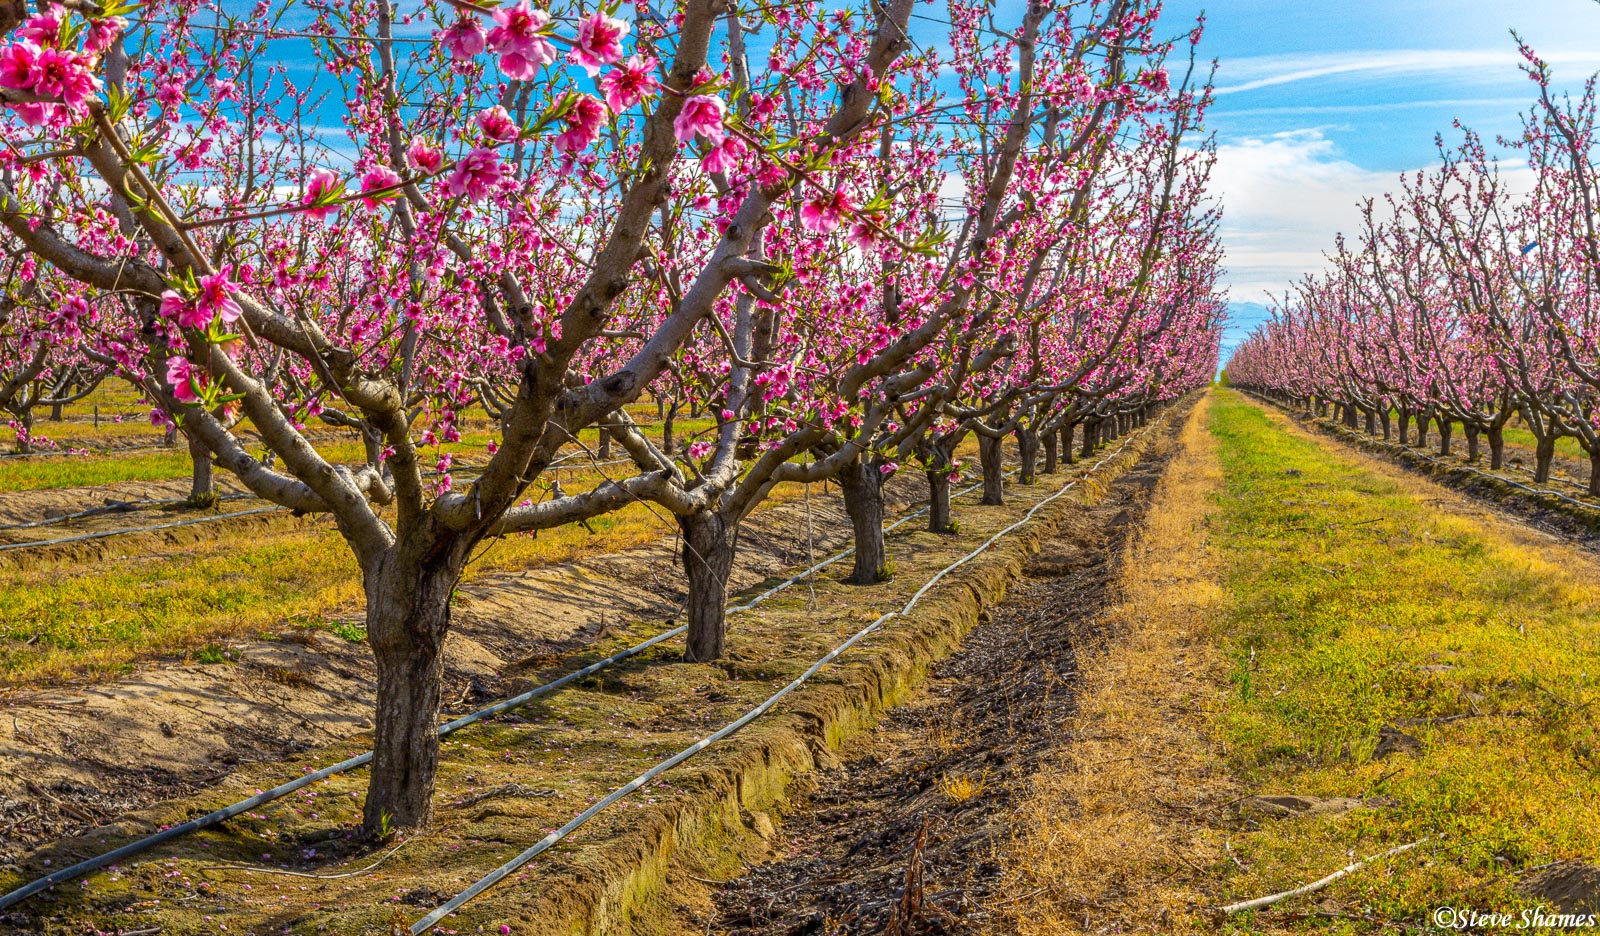 Along the Fresno County Blossom Trail, a great springtime drive!